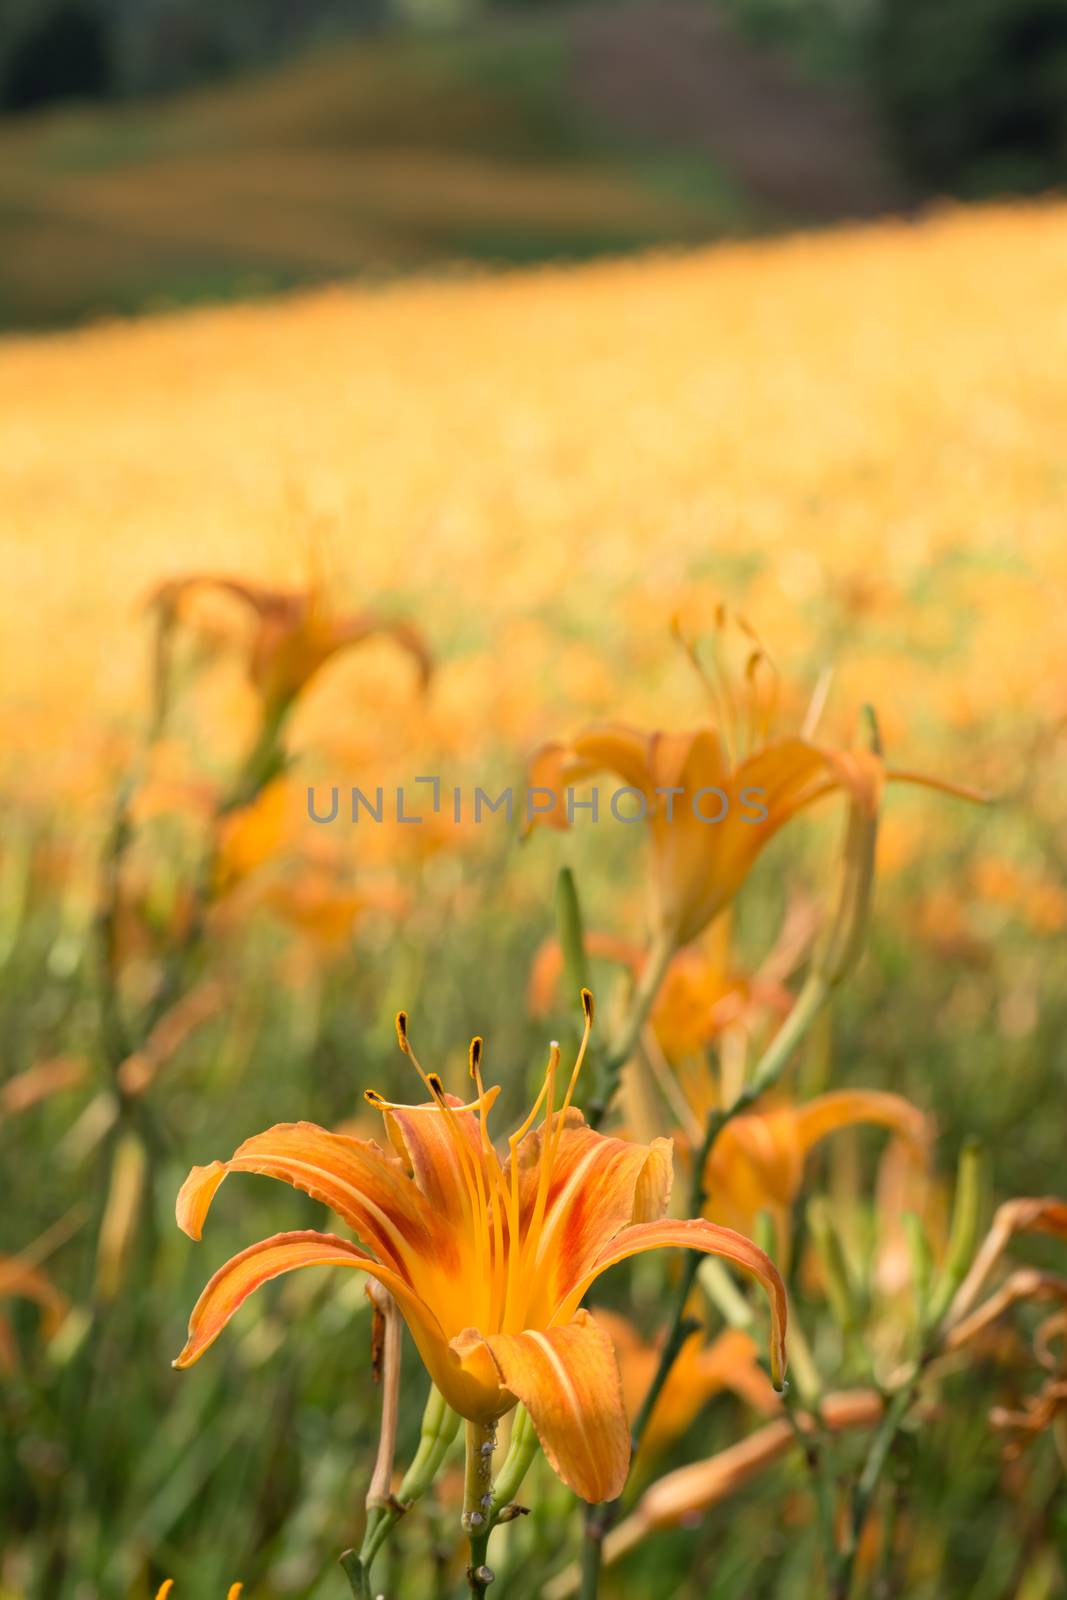 Field of tiger lily flowers.